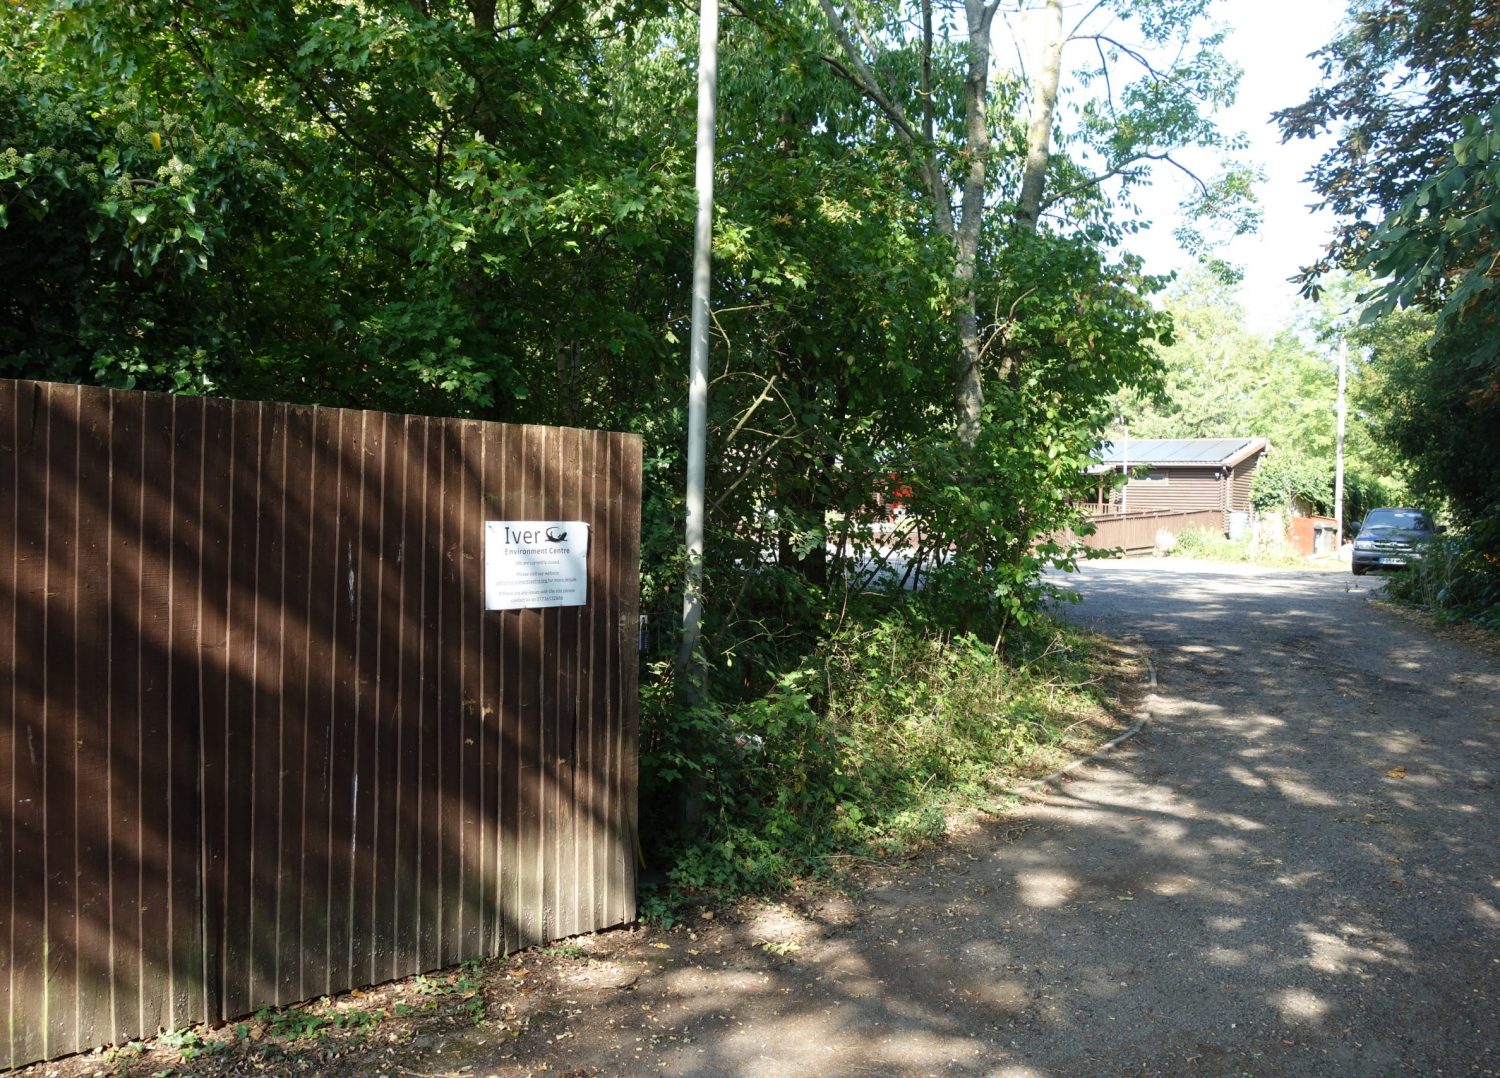 The driveway into the centre now.